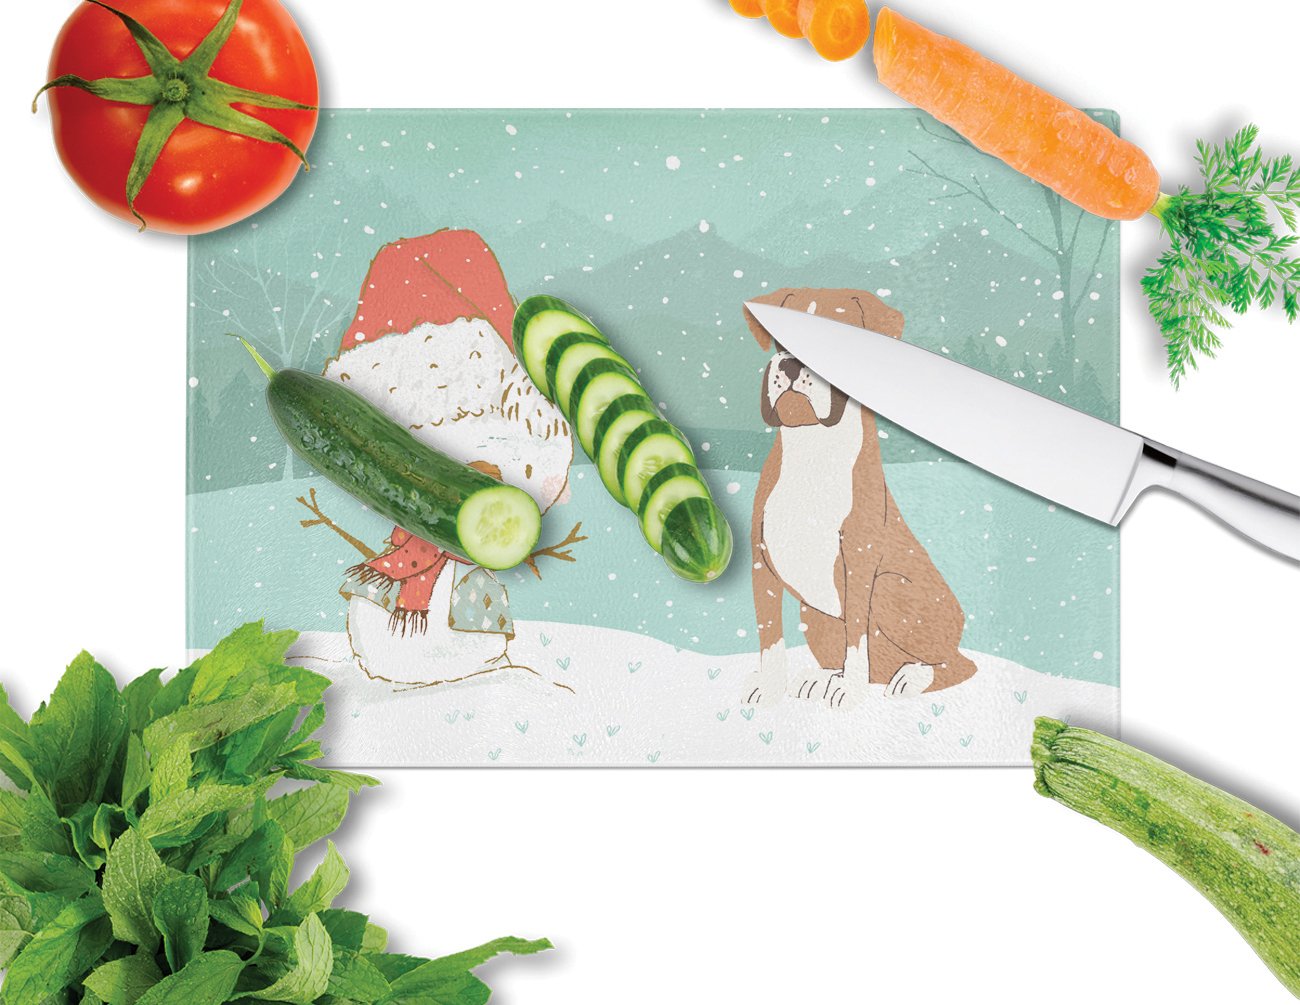 Fawn Boxer and Snowman Christmas Glass Cutting Board Large CK2036LCB by Caroline's Treasures